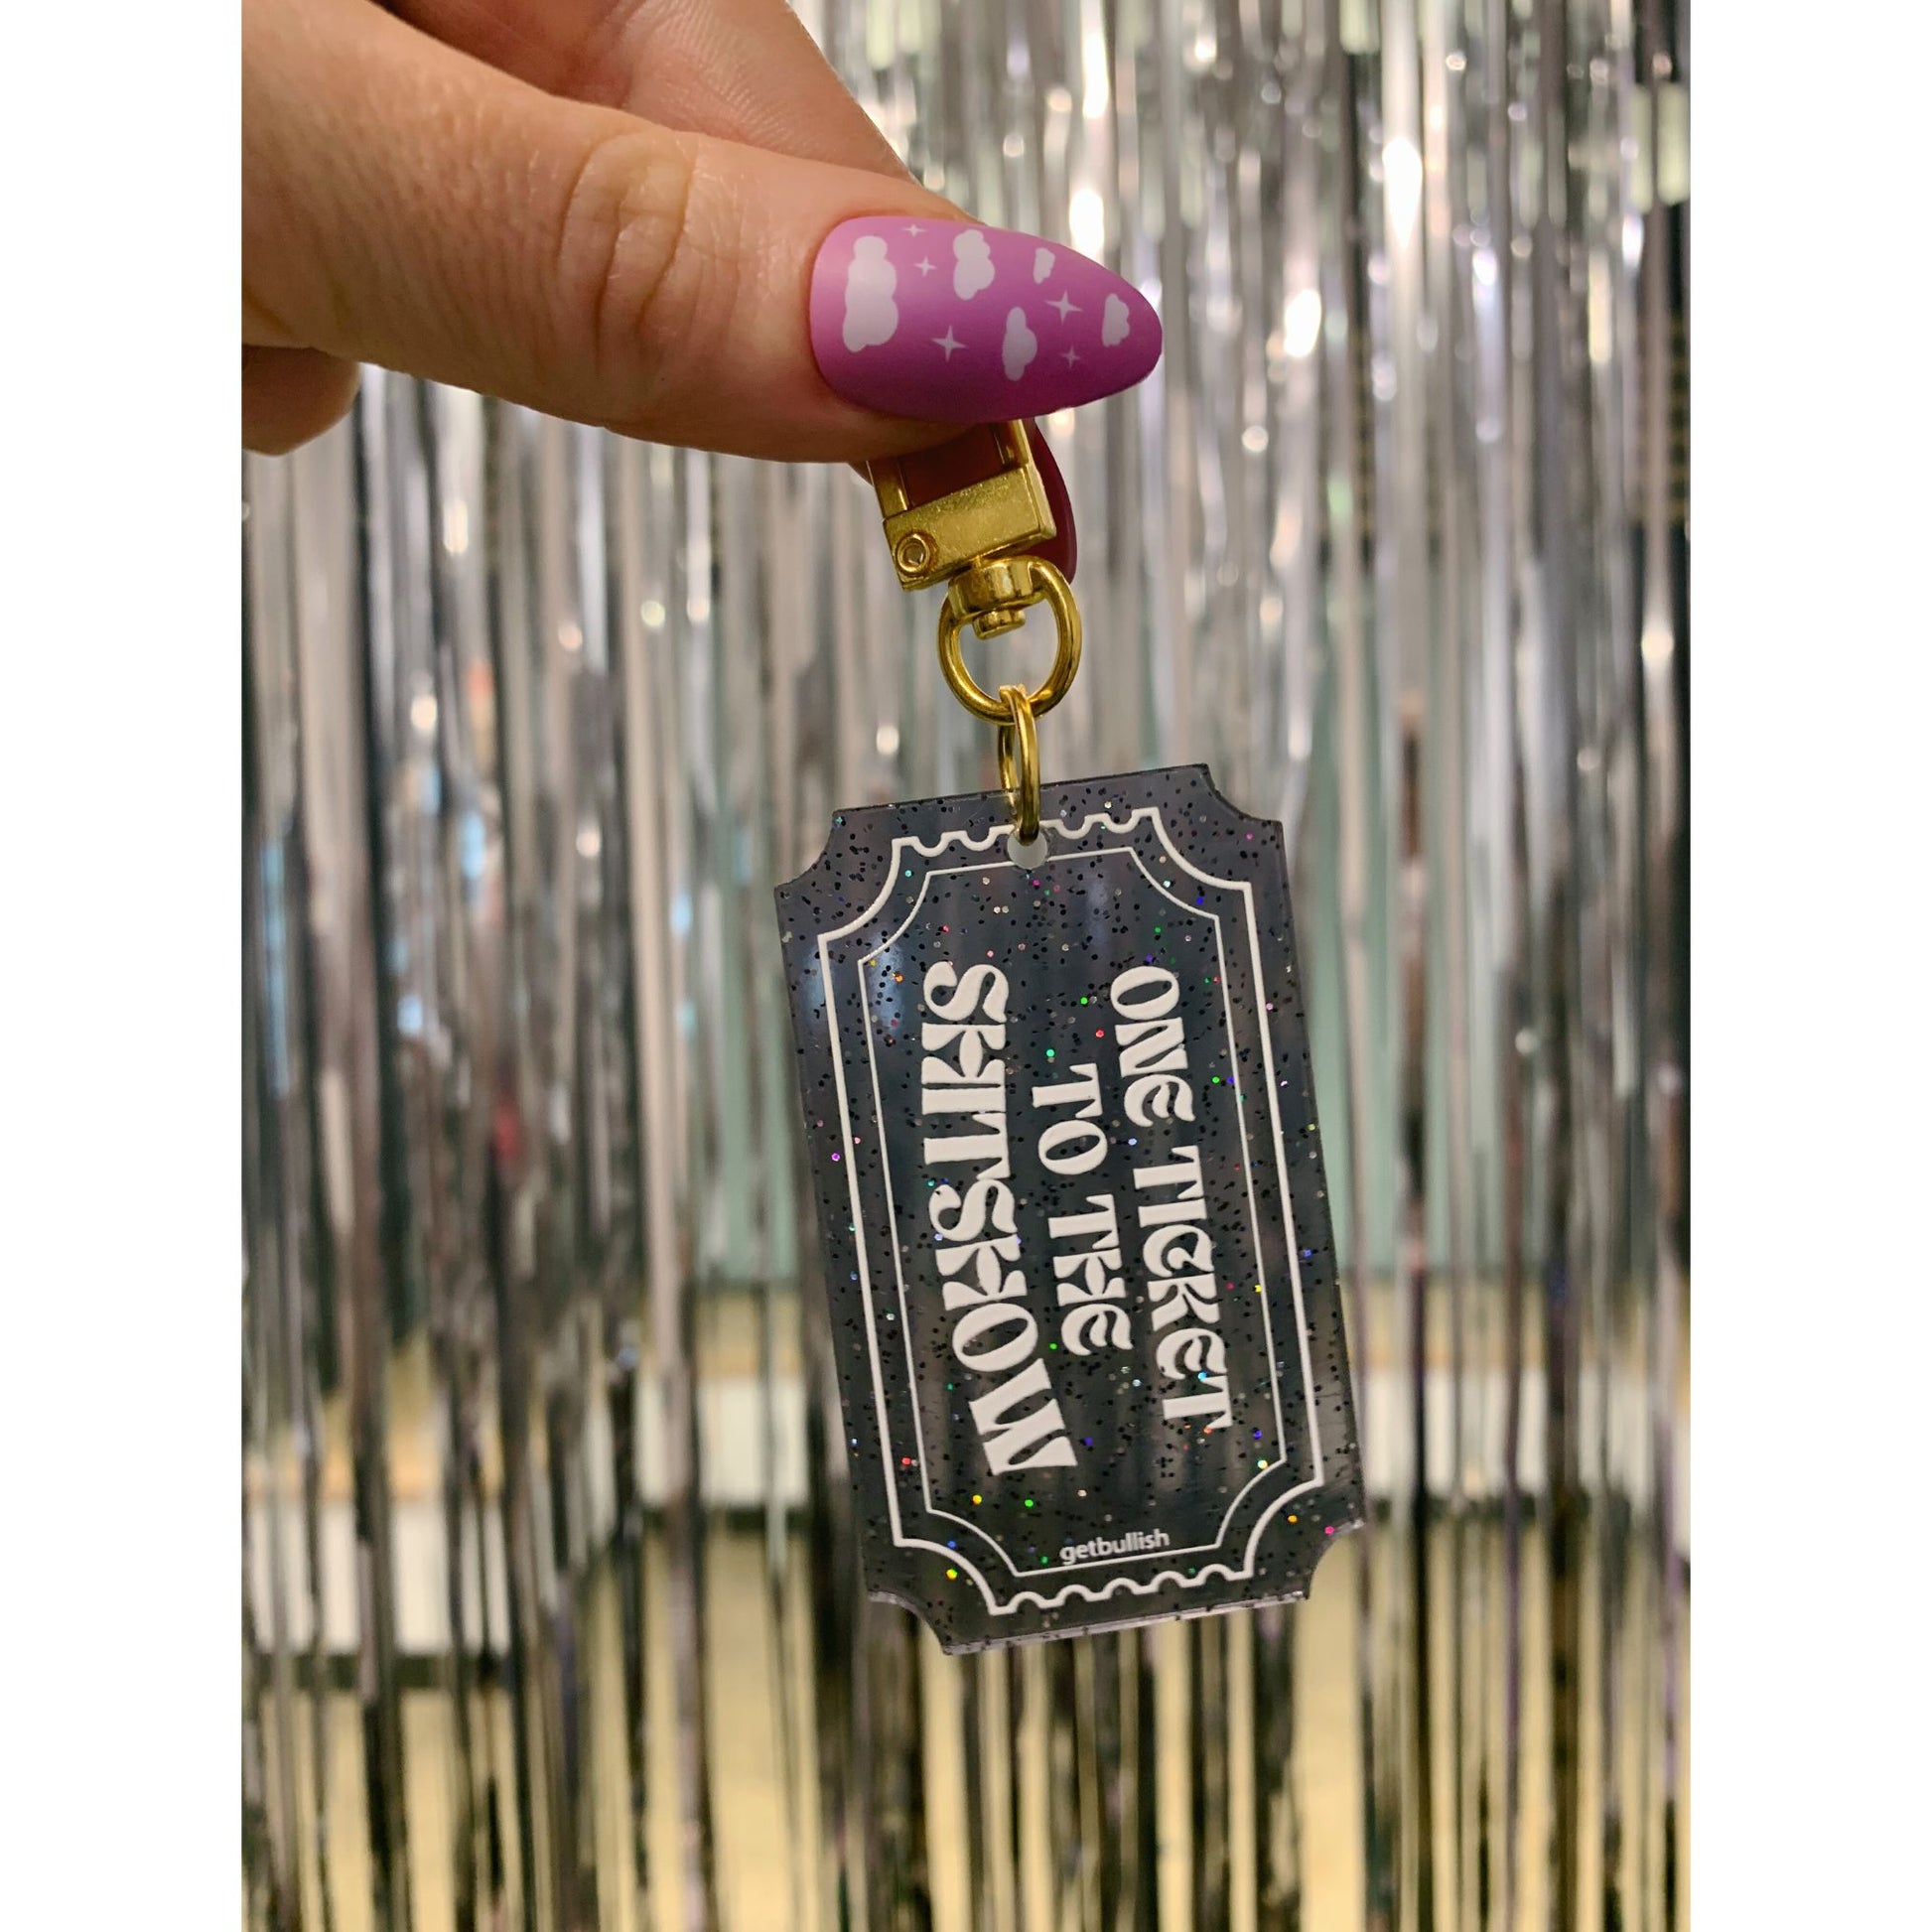 One Ticket to the Shitshow Black Glitter Acrylic Keychain | Ticket-shaped Keyholder